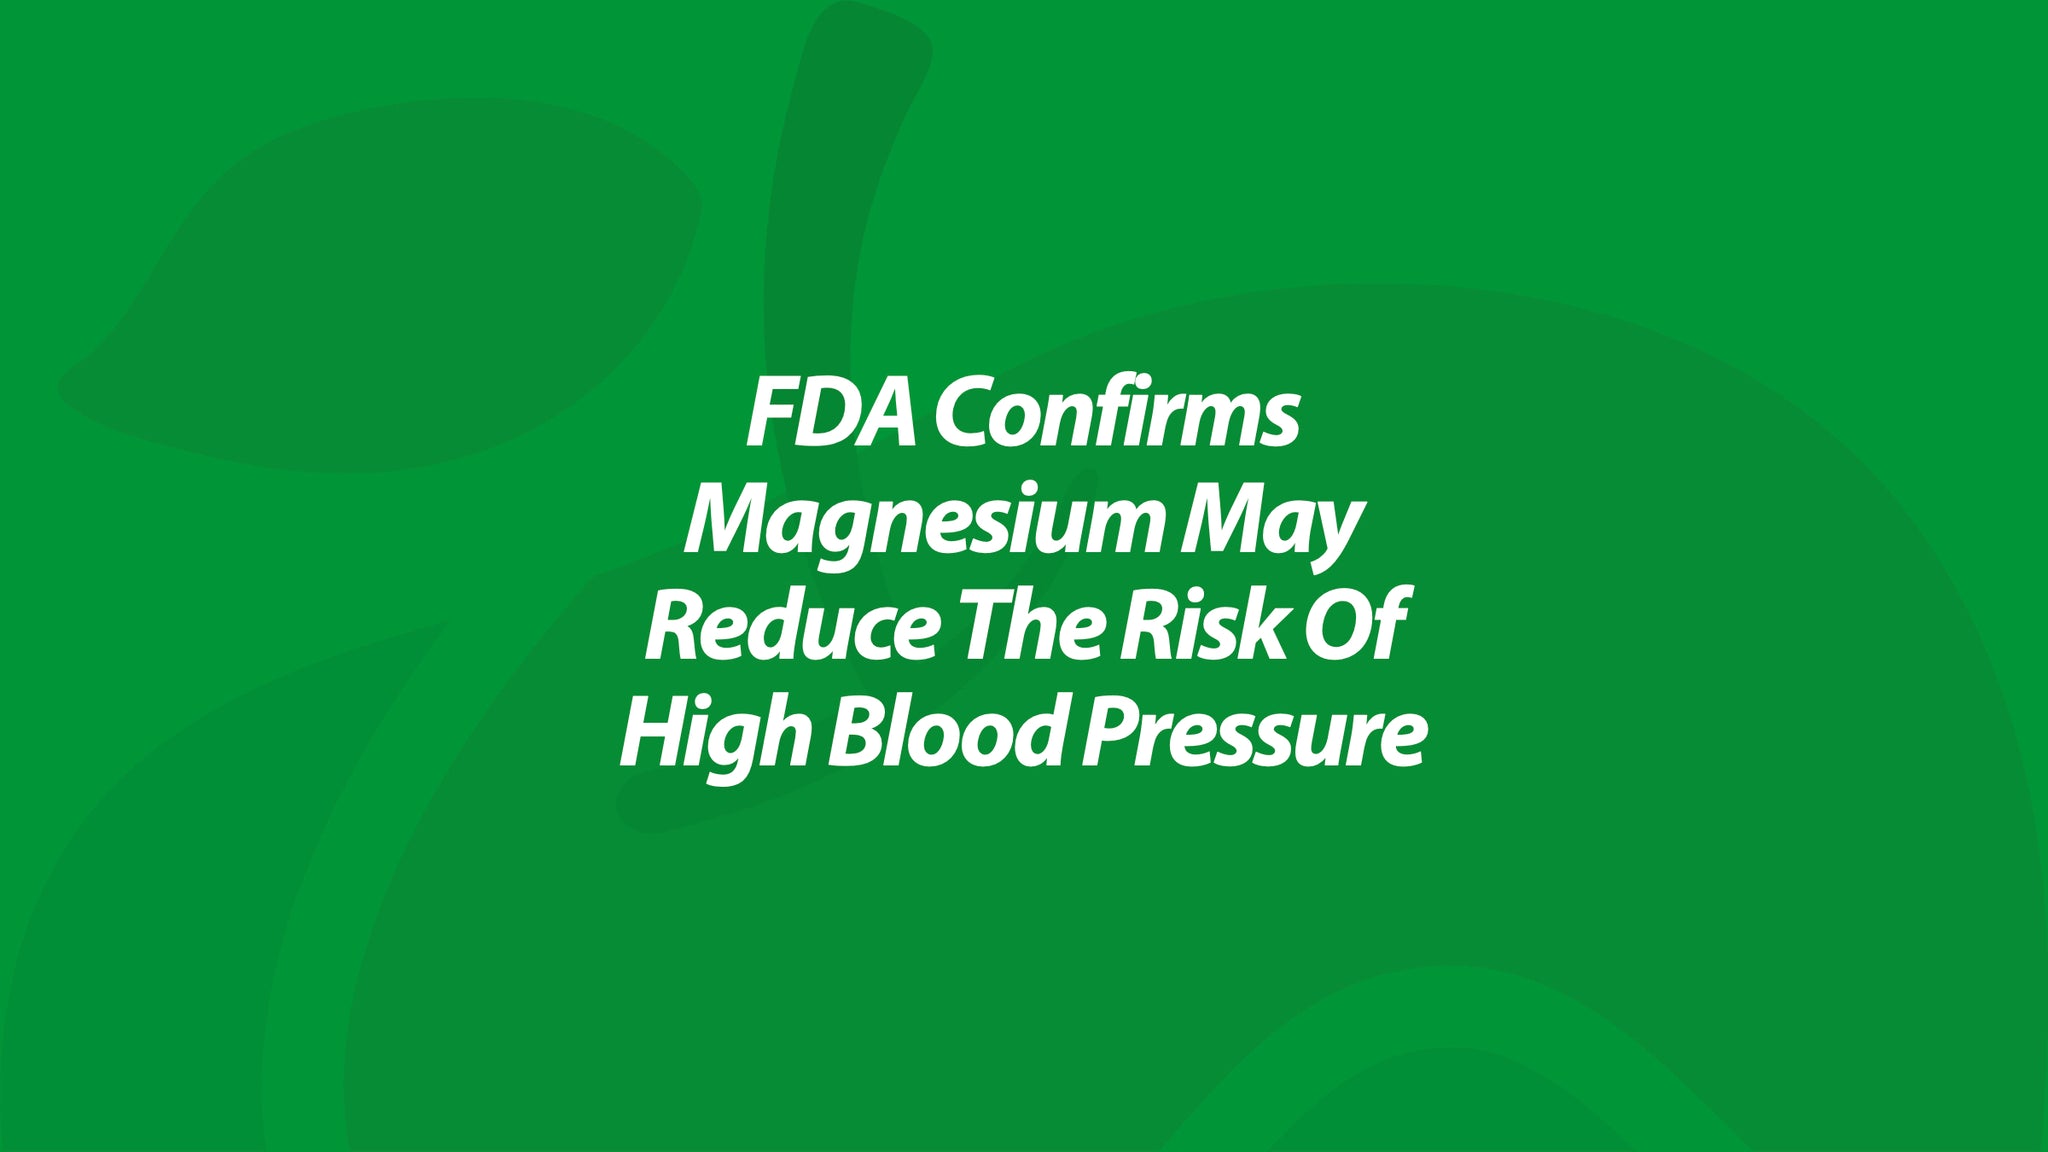 FDA confirms Magnesium may reduce the risk of High Blood Pressure